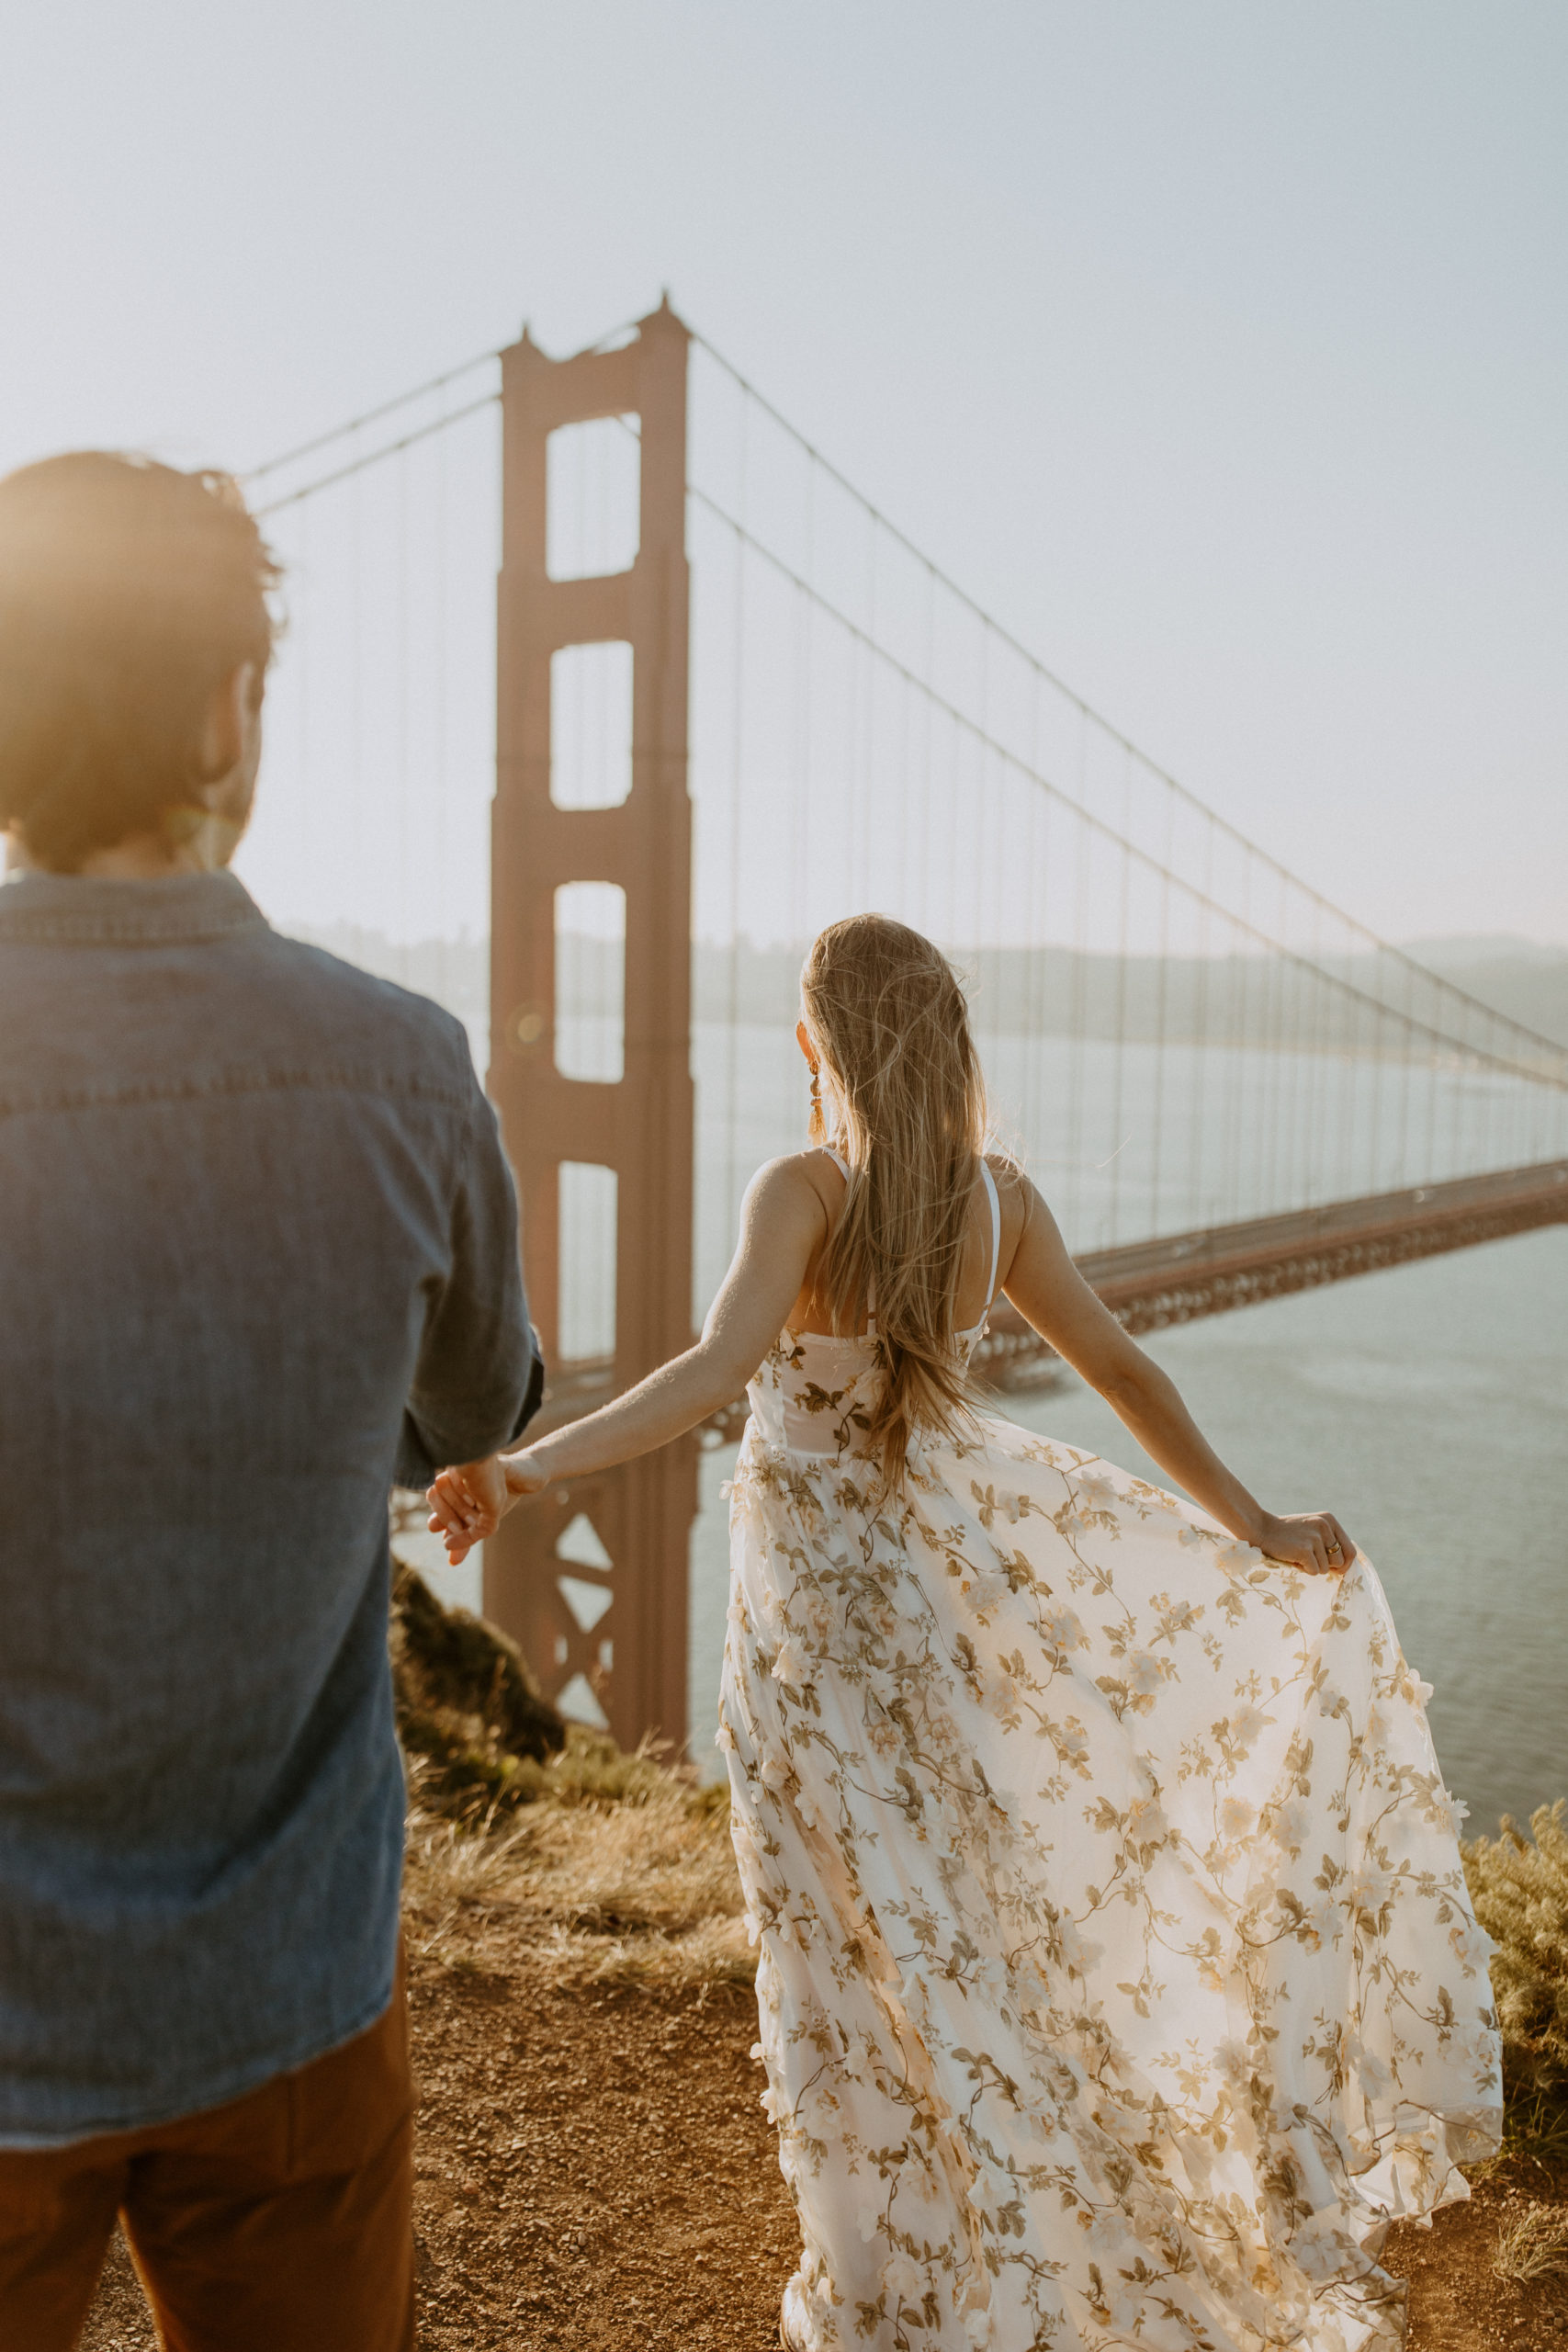 the couple twirling in the sunrise at the Golden Gate Bridge in San Francisco